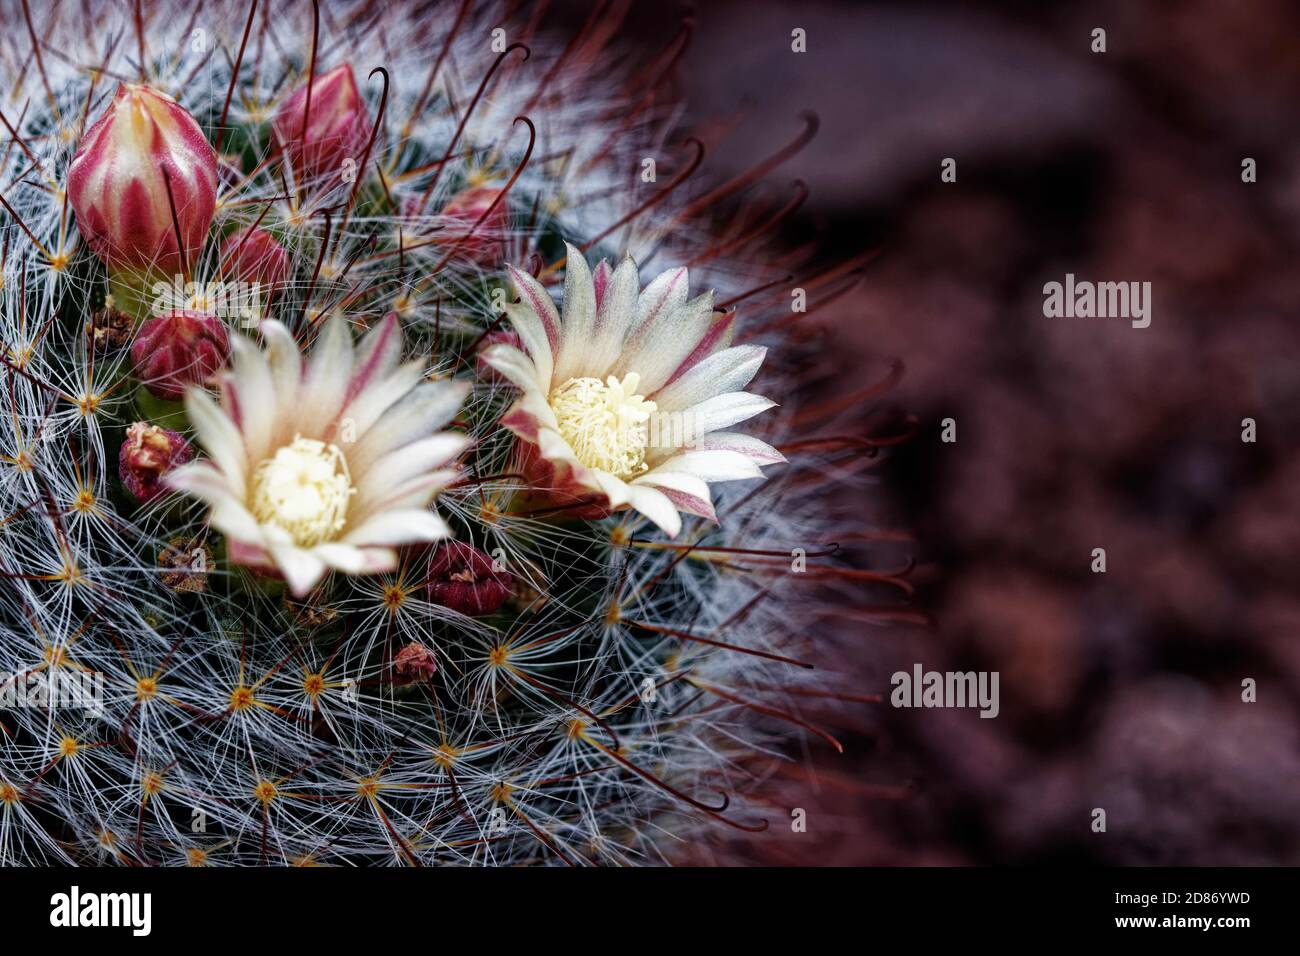 Mammillaria glassii is a species of cactus in the subfamily Cactoideae. It  is a small, clumping cactus with 